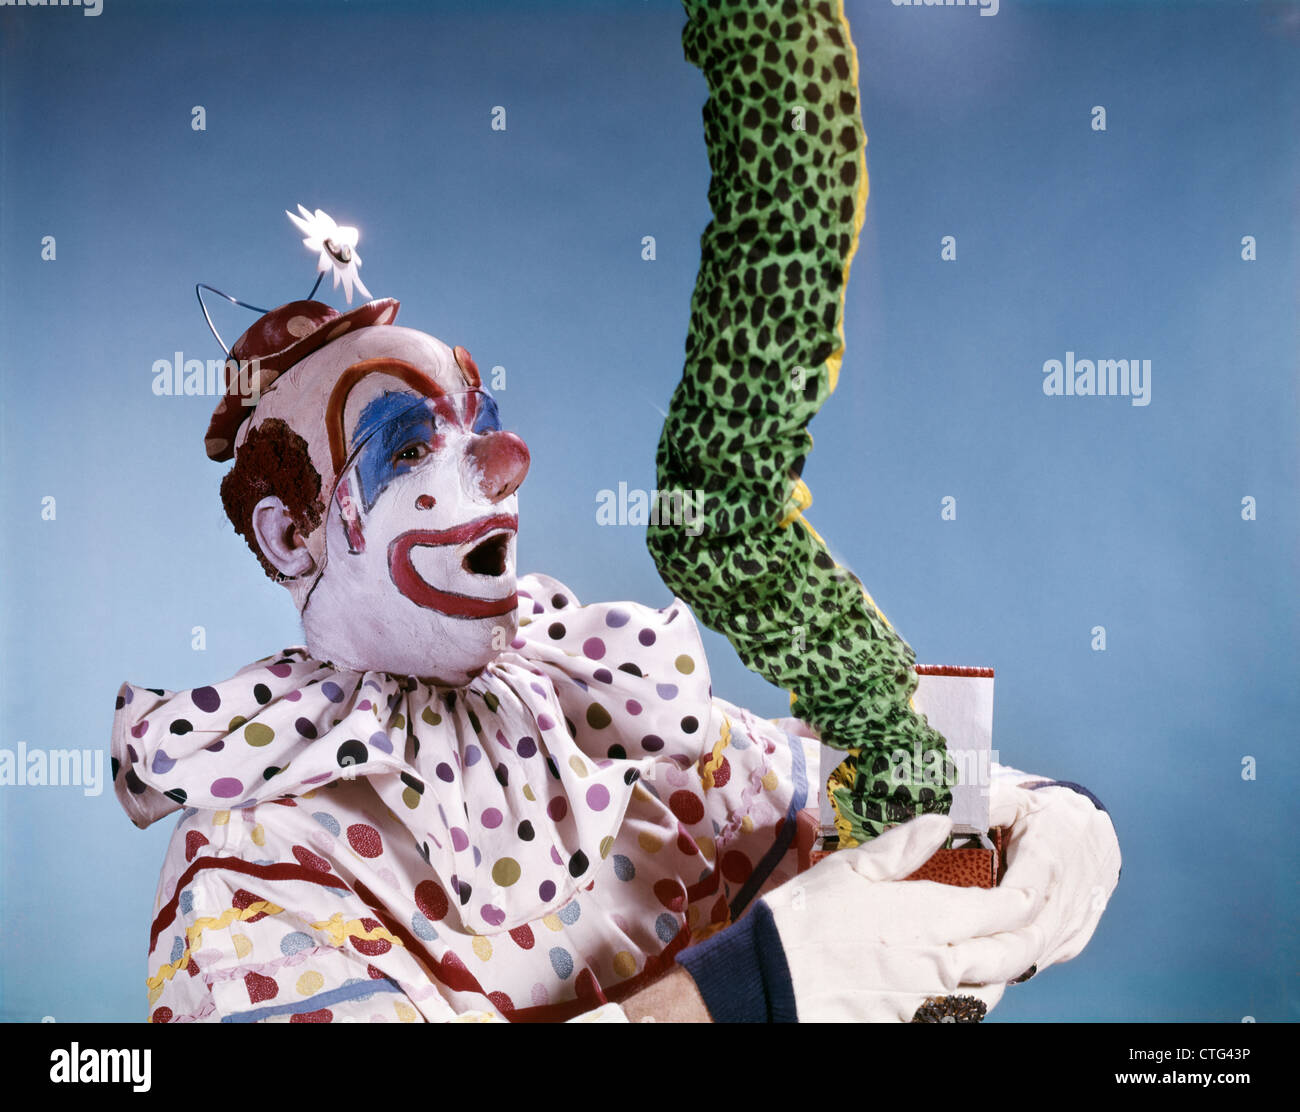 1960s SURPRISED CLOWN POLKA DOT COSTUME LETTING SNAKE LIZARD GREEN THING JUMP OUT OF BOX Stock Photo